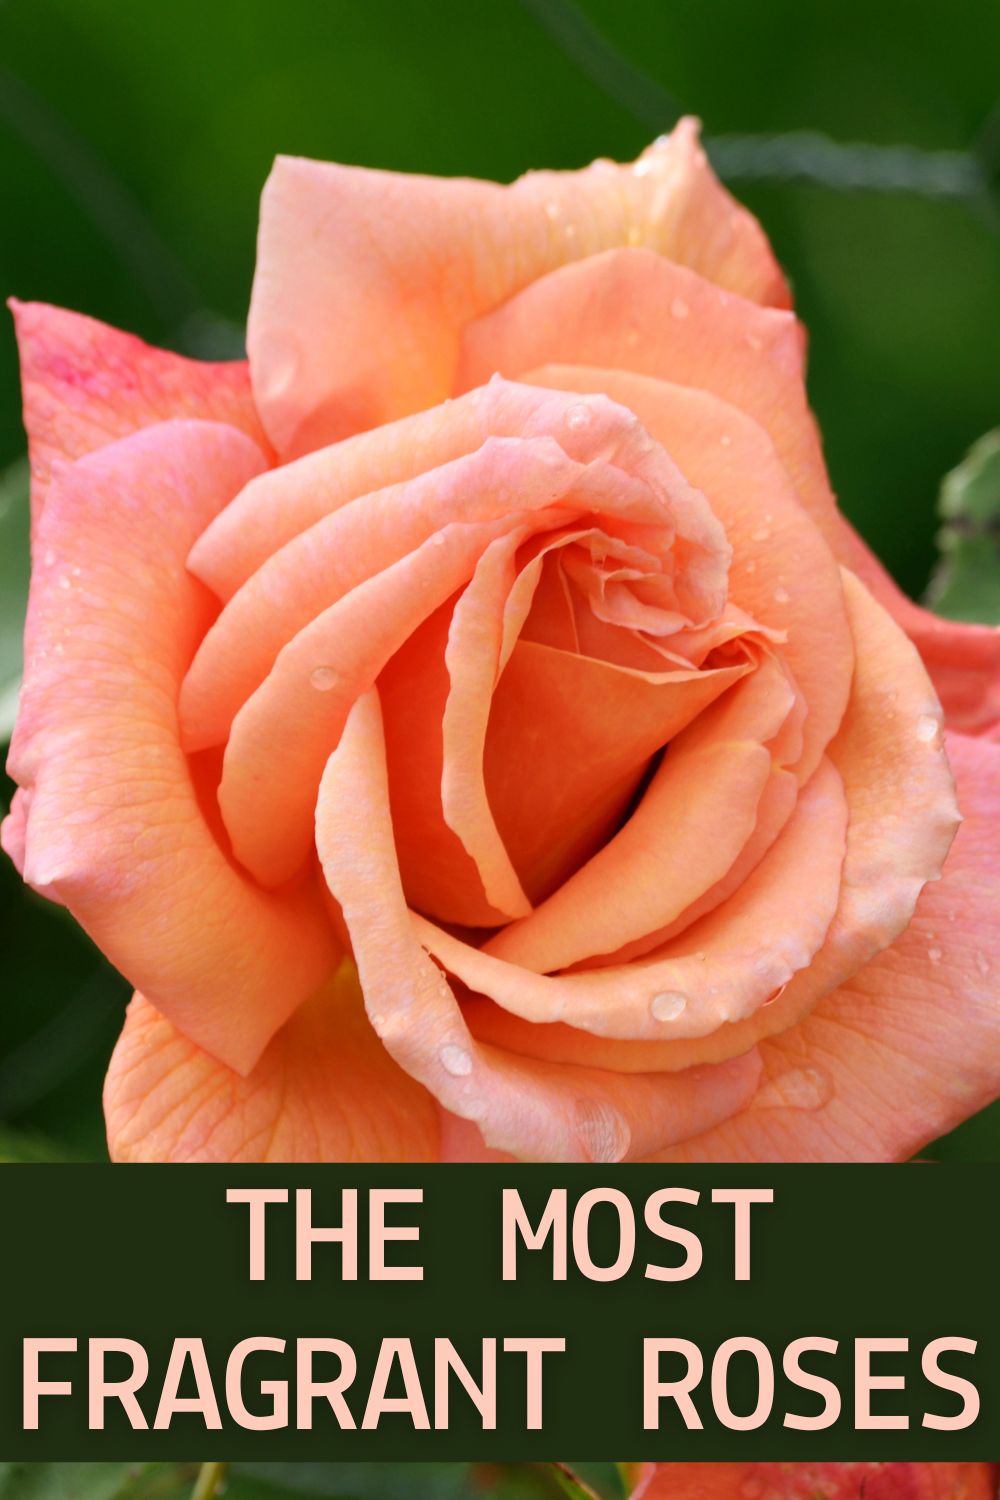 The most fragrant roses.